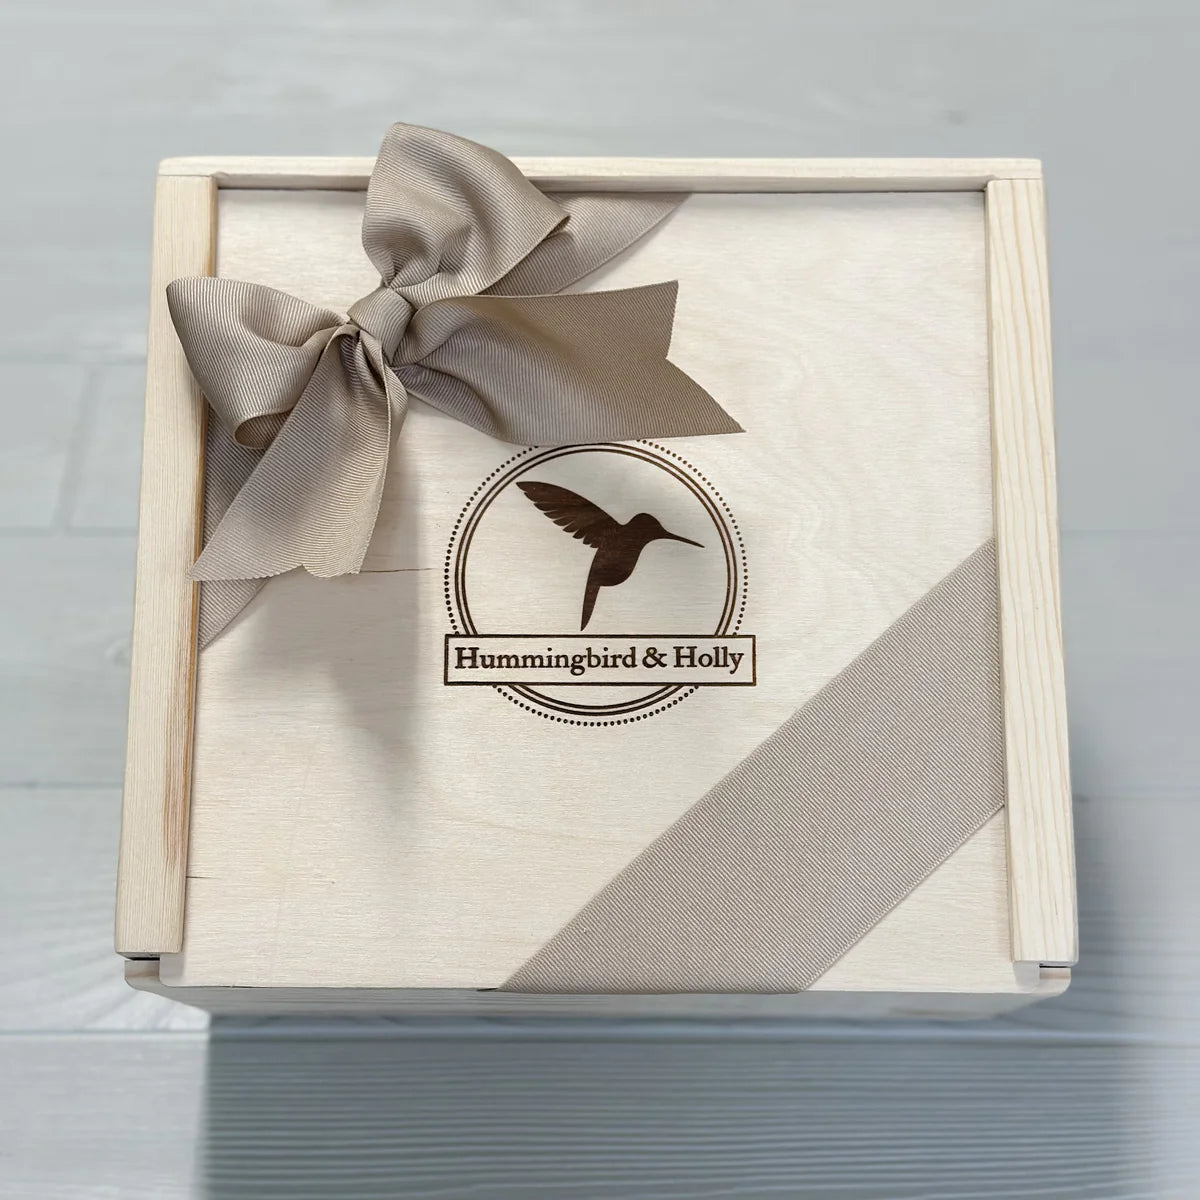 close up of the wooden slide lid box included in our Celebrate gift basket